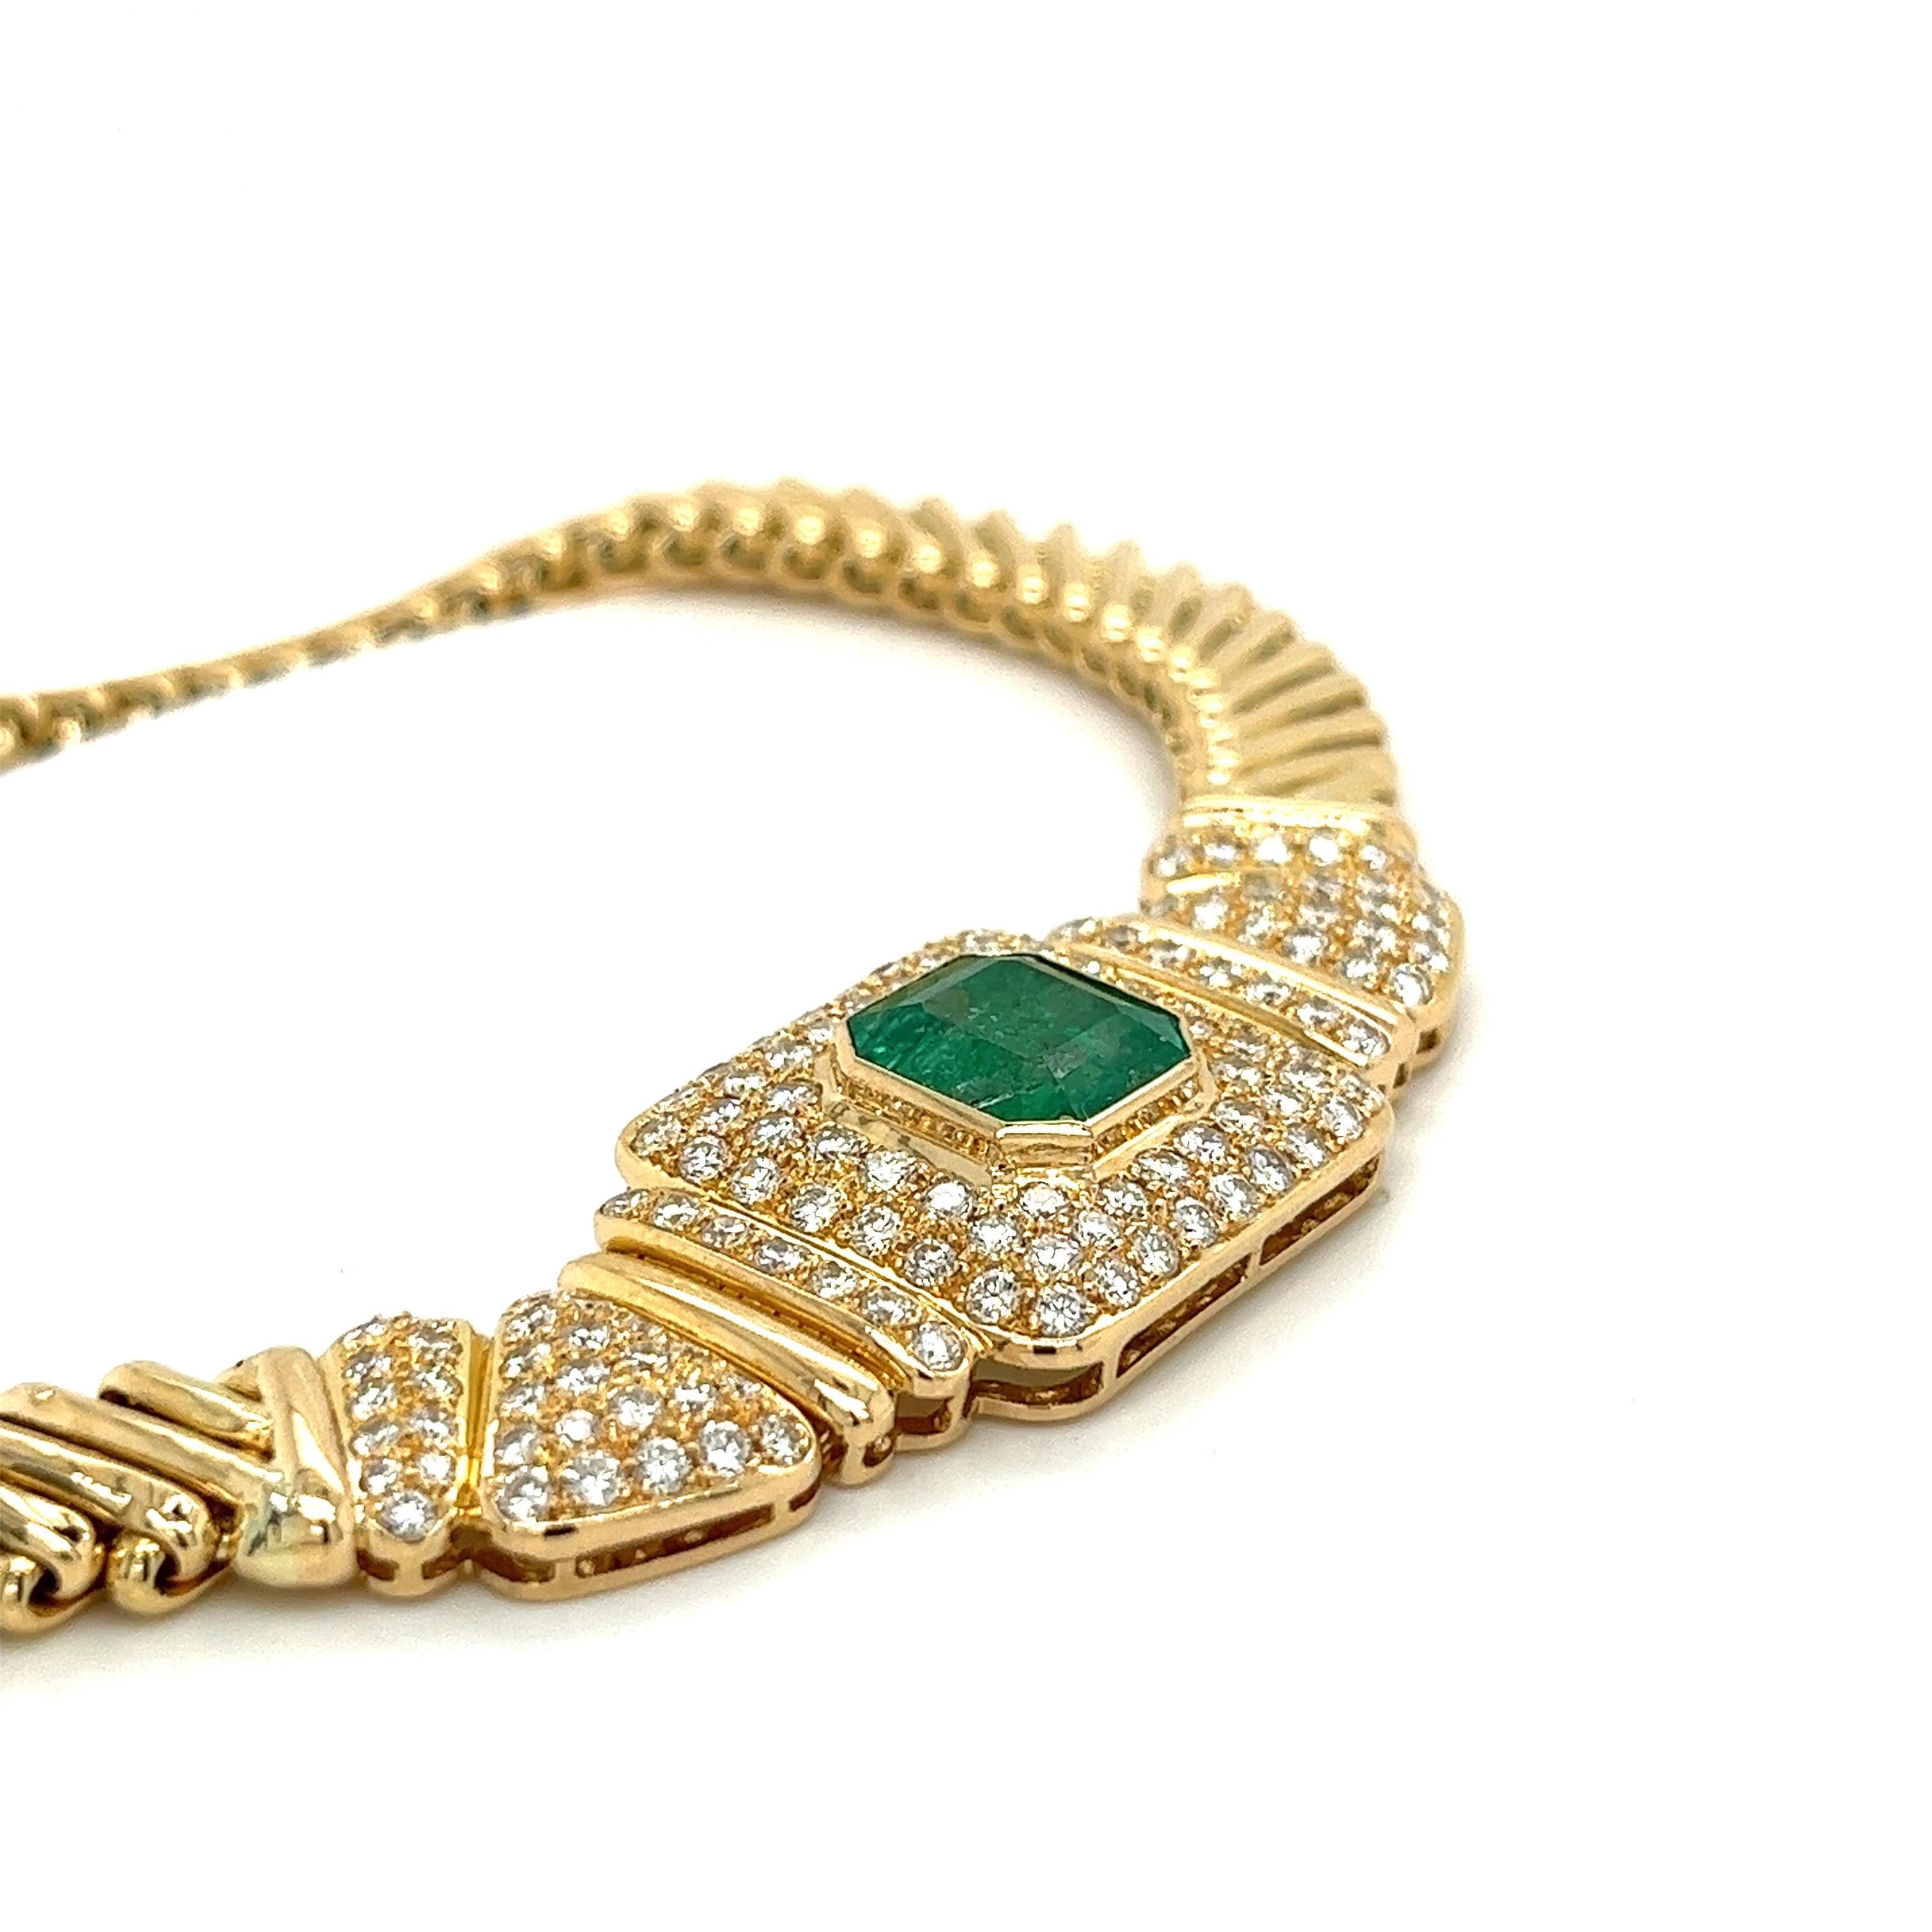 6 carat natural Colombian emerald center stone accentuated by 60 round cut genuine diamonds mounts this stunning ladies' choker necklace. Set in an 18 karat yellow gold flat fancy chain link that sits beautifully on the neck. The center stone is